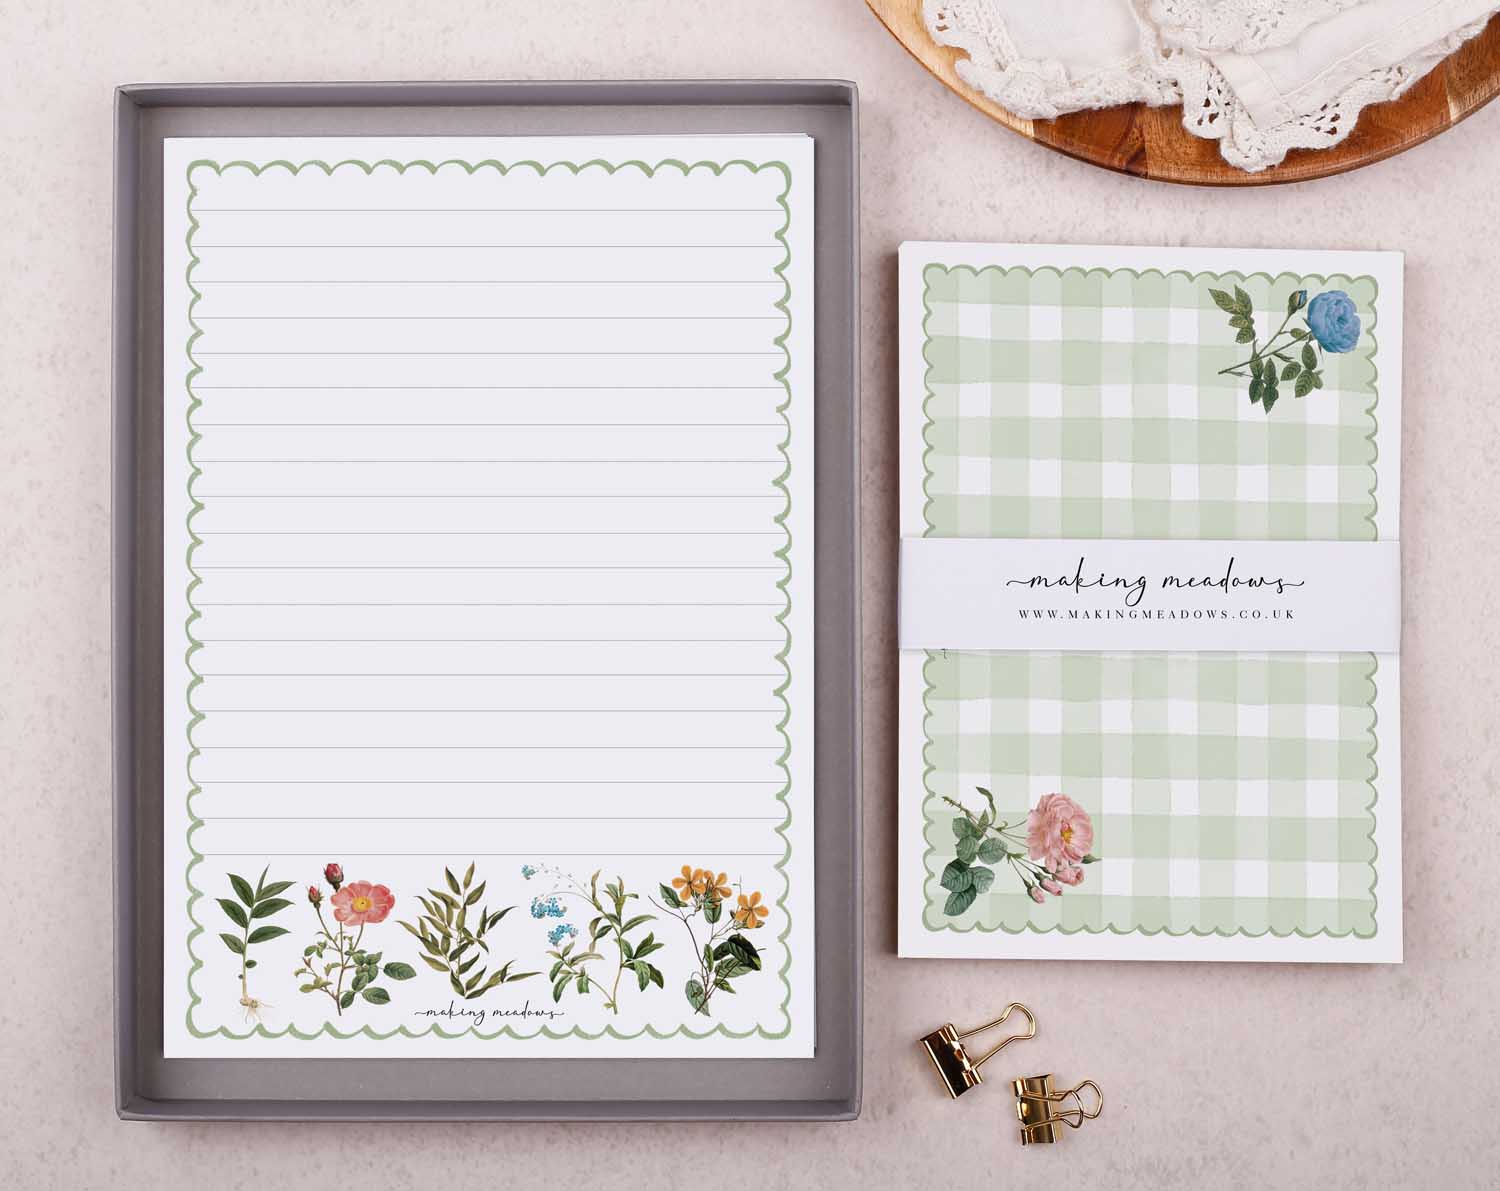 traditional flowers, green gingham A5 writing paper set comes with matching envelopes